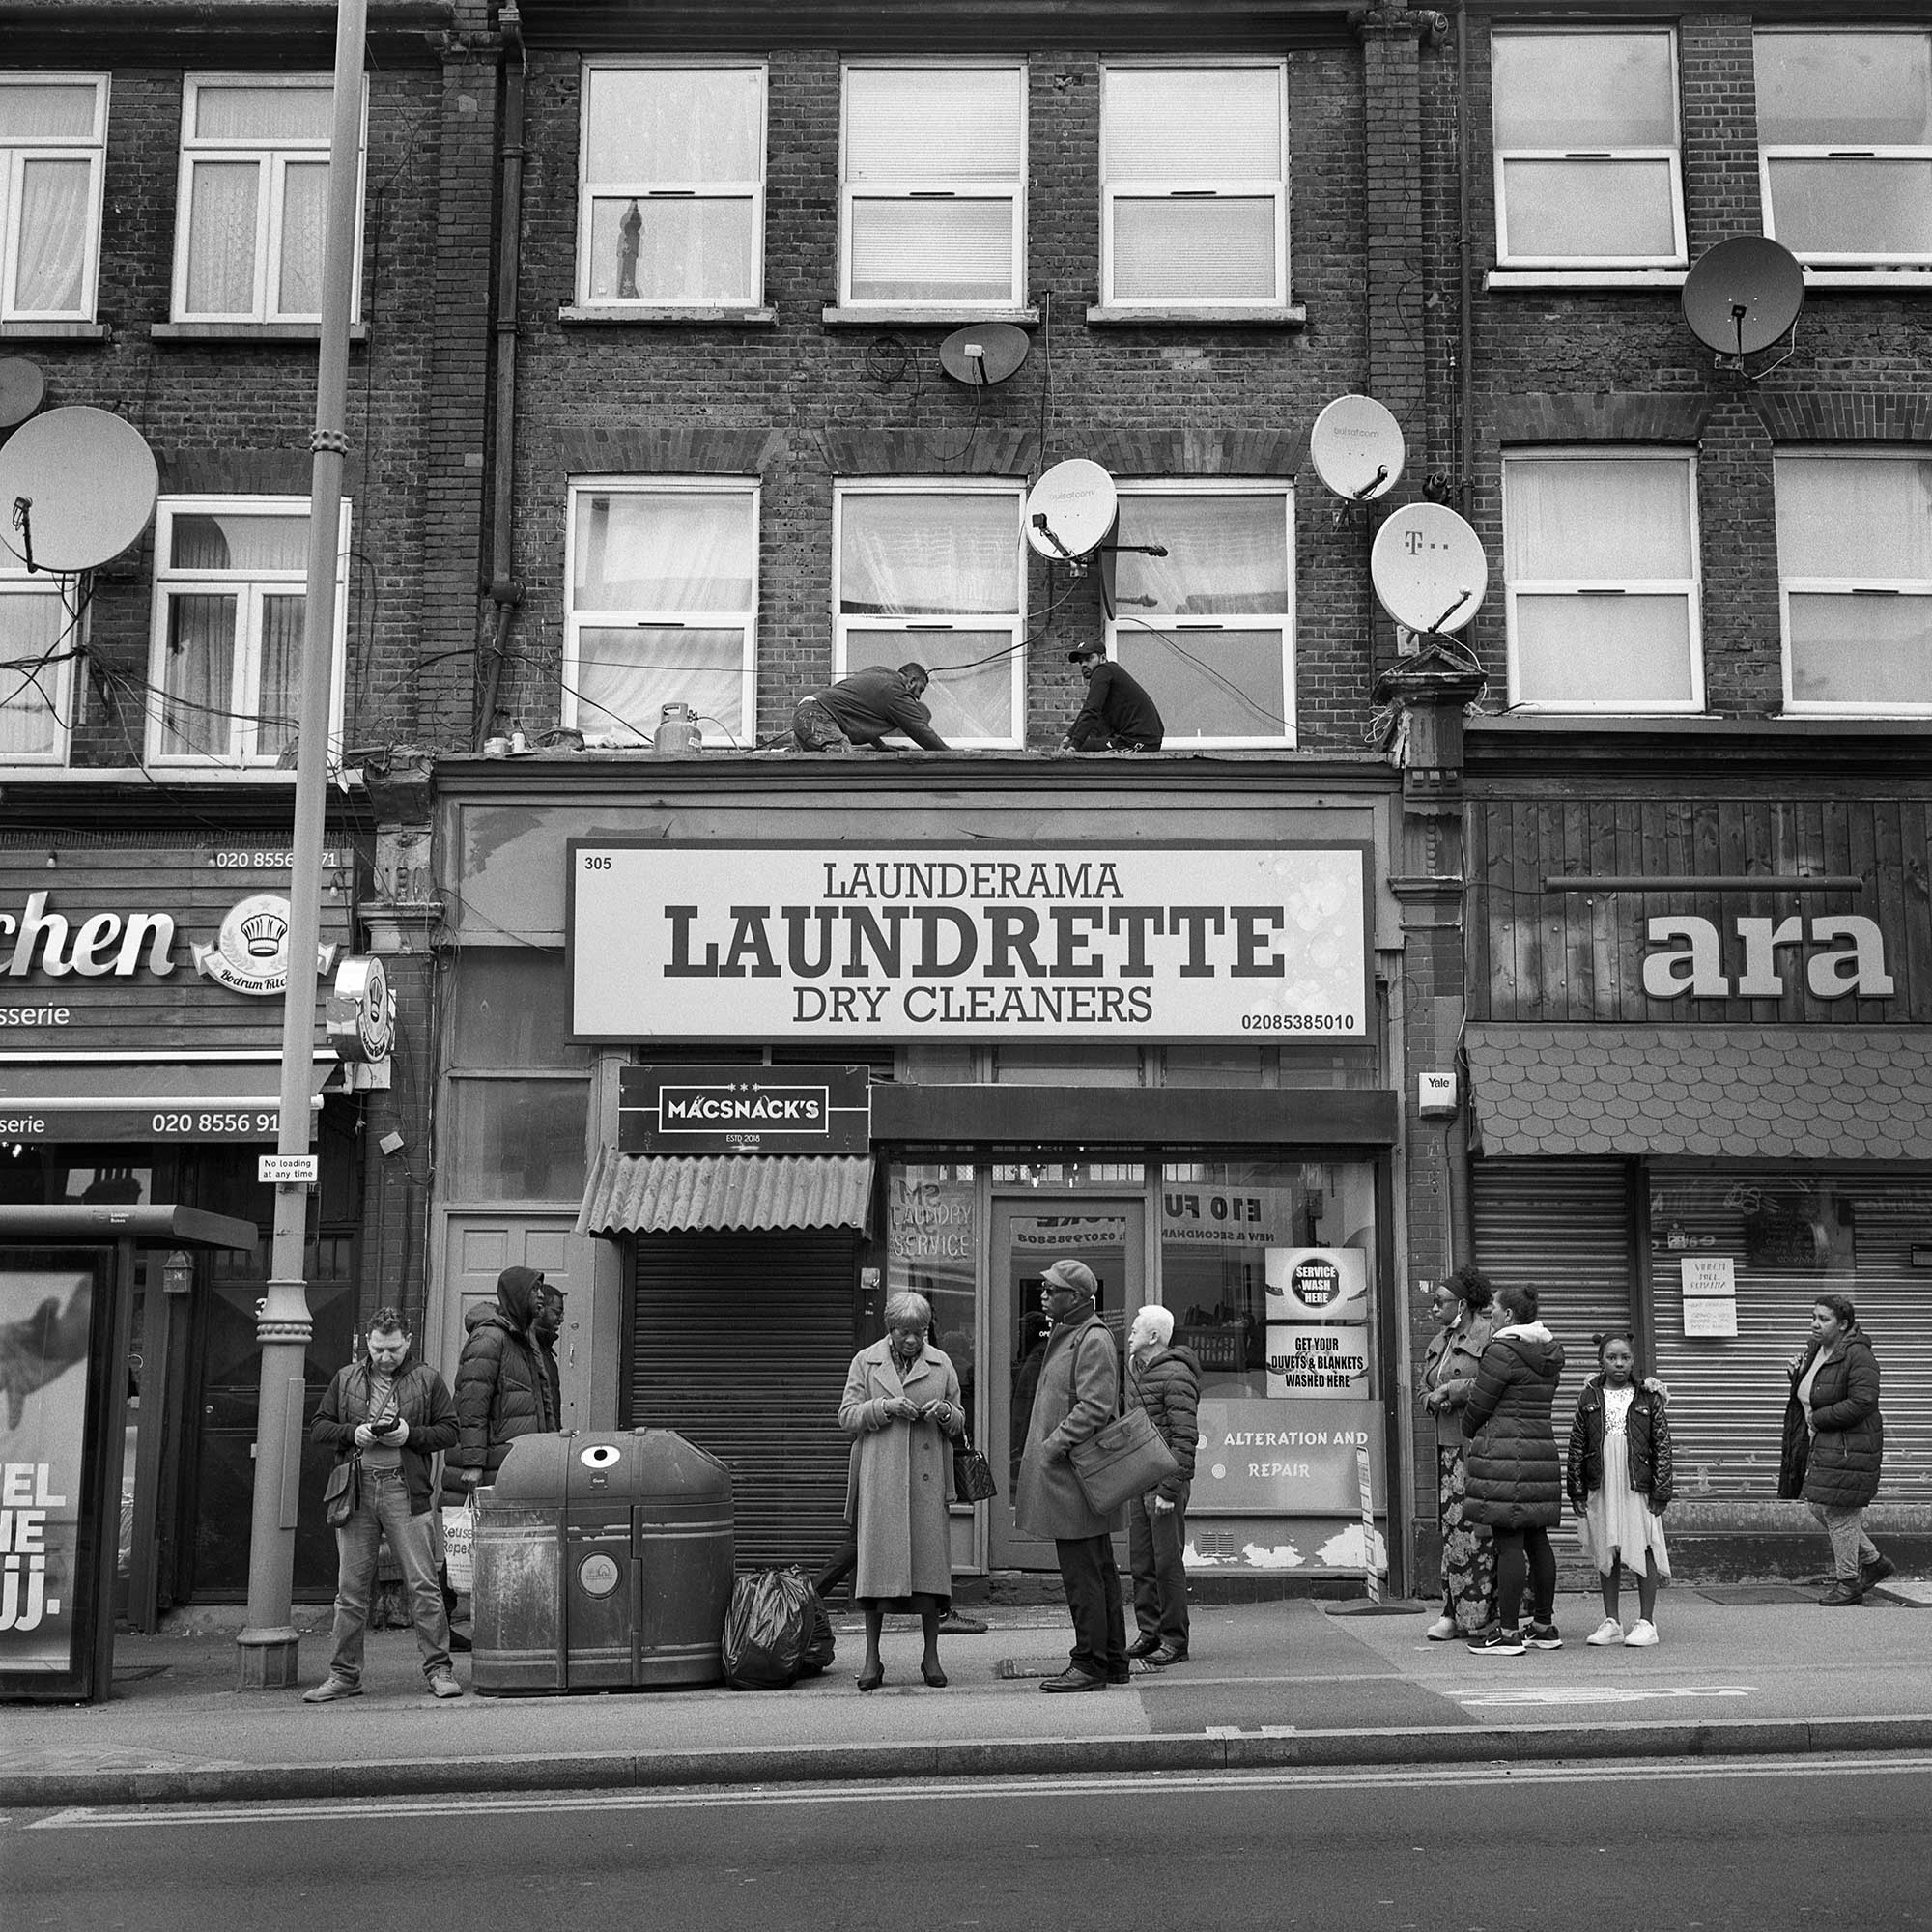 Black and white image of people waiting at a bus stop and in the background are people working on the roof above the launderette sign.